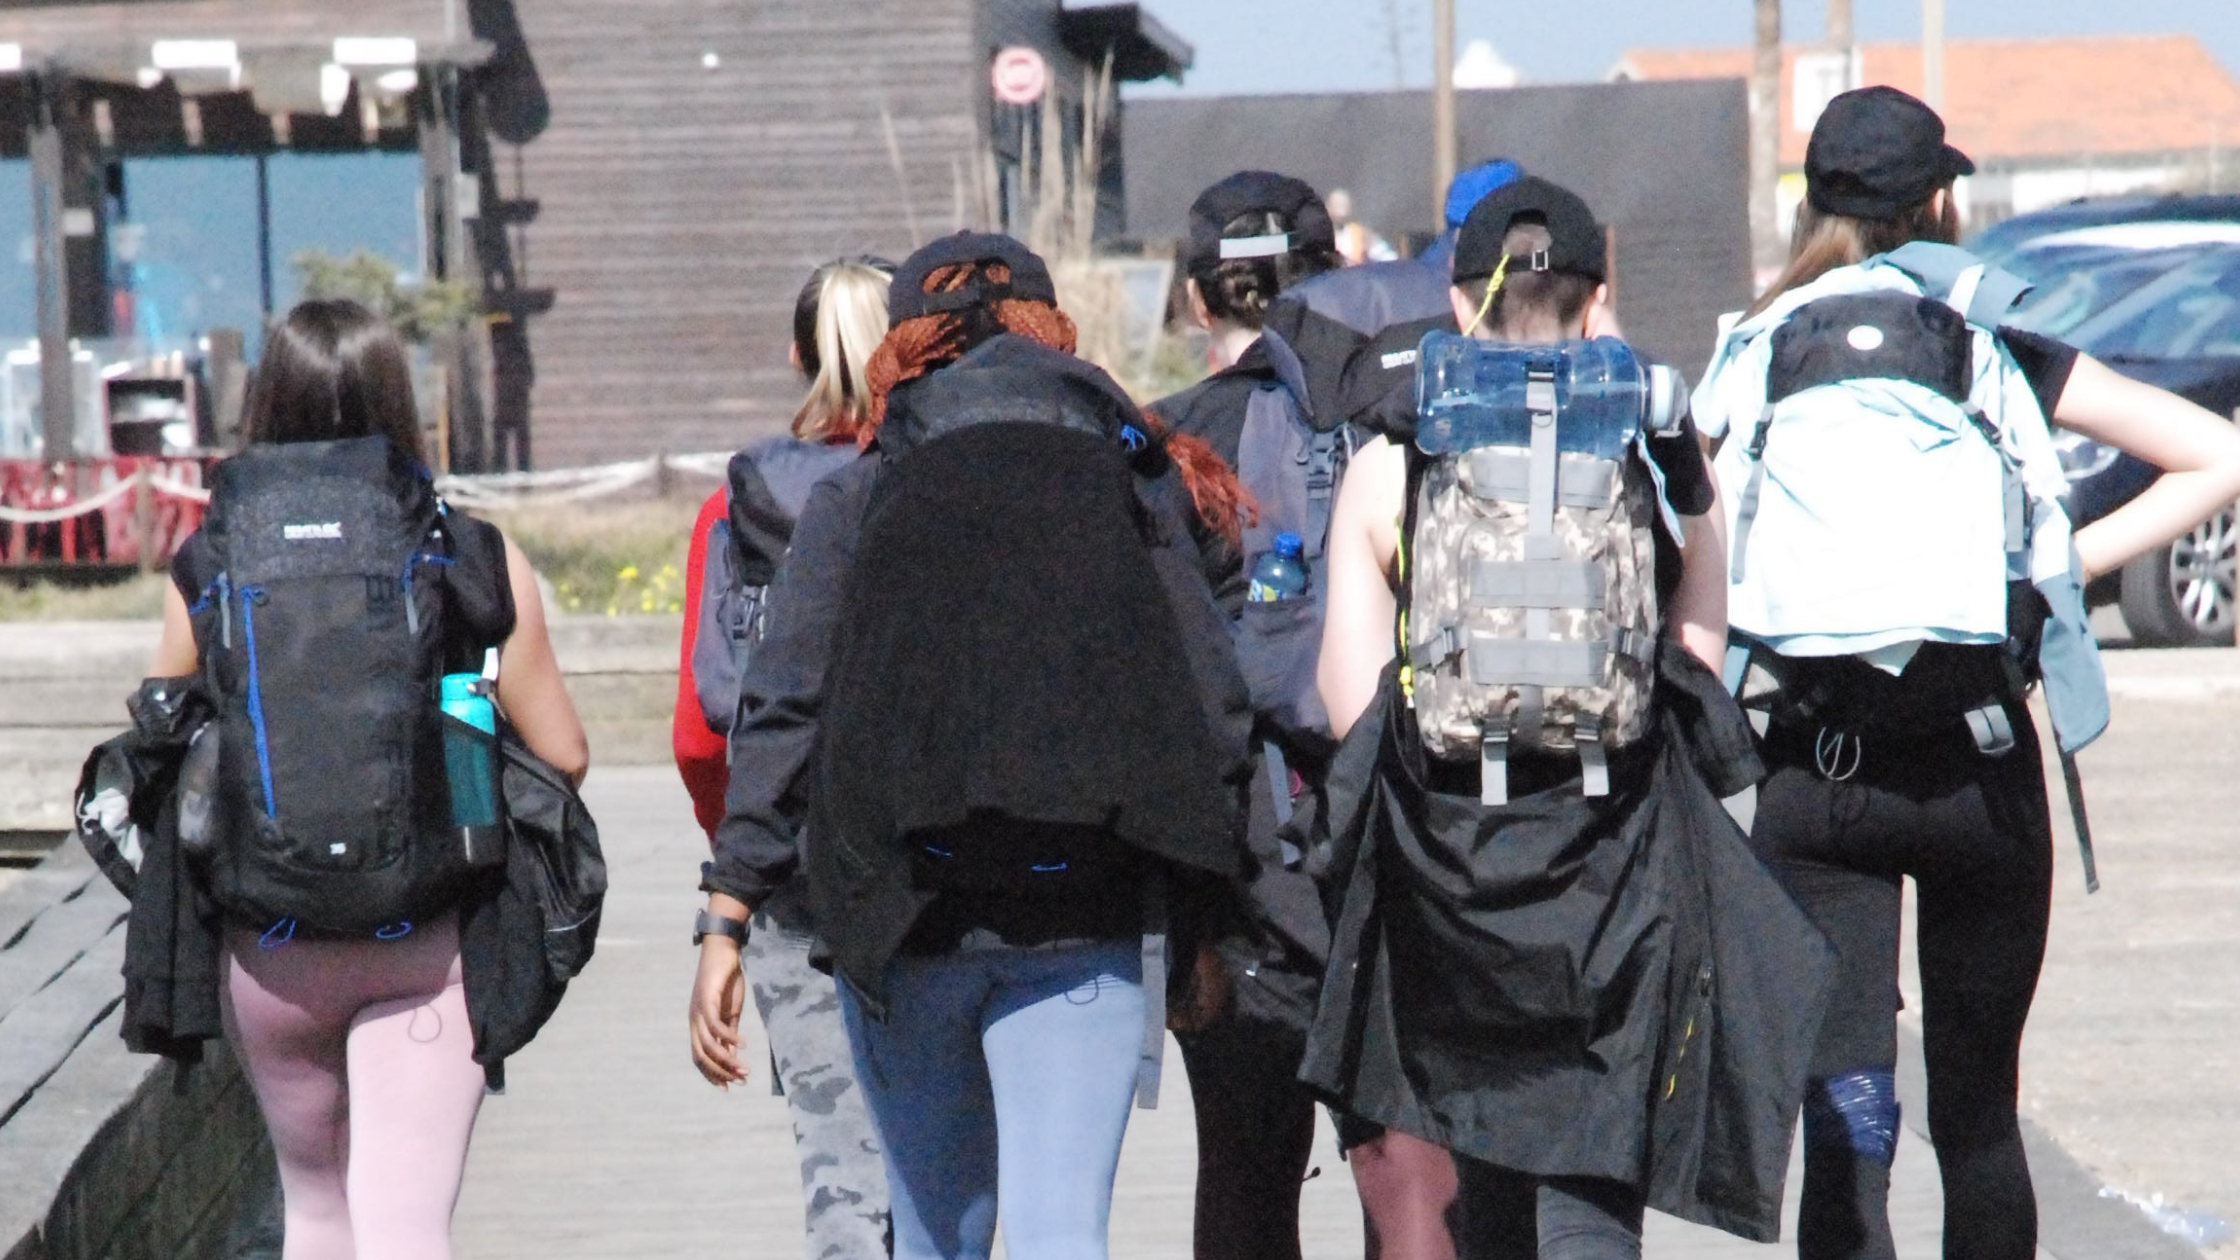 A group of students from Pobalscoil Neasáin walking together with hiking backpacks on.